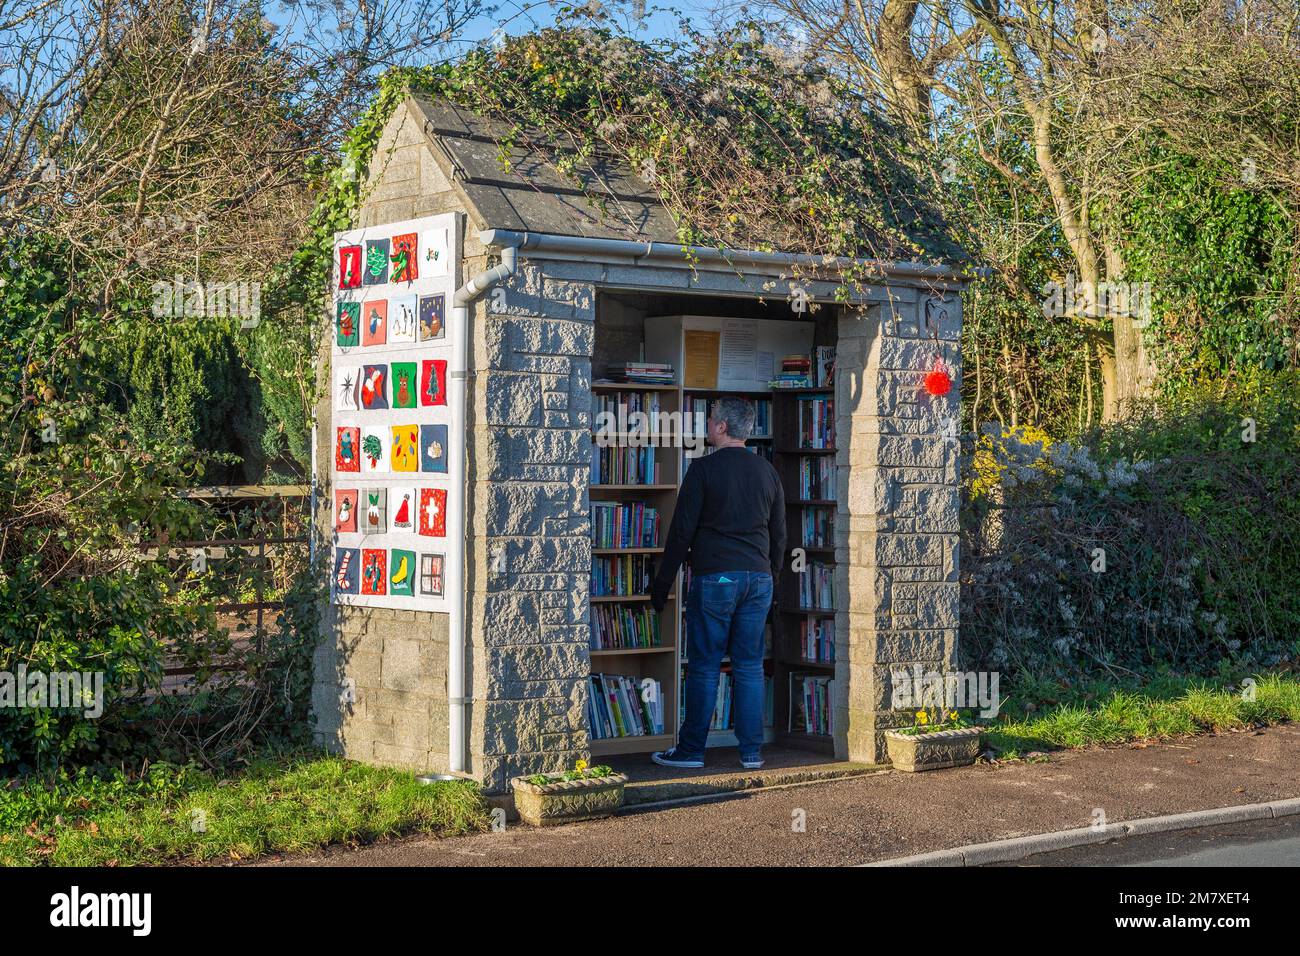 Community library in a disused bus shelter, Gloucestershire. Stock Photo